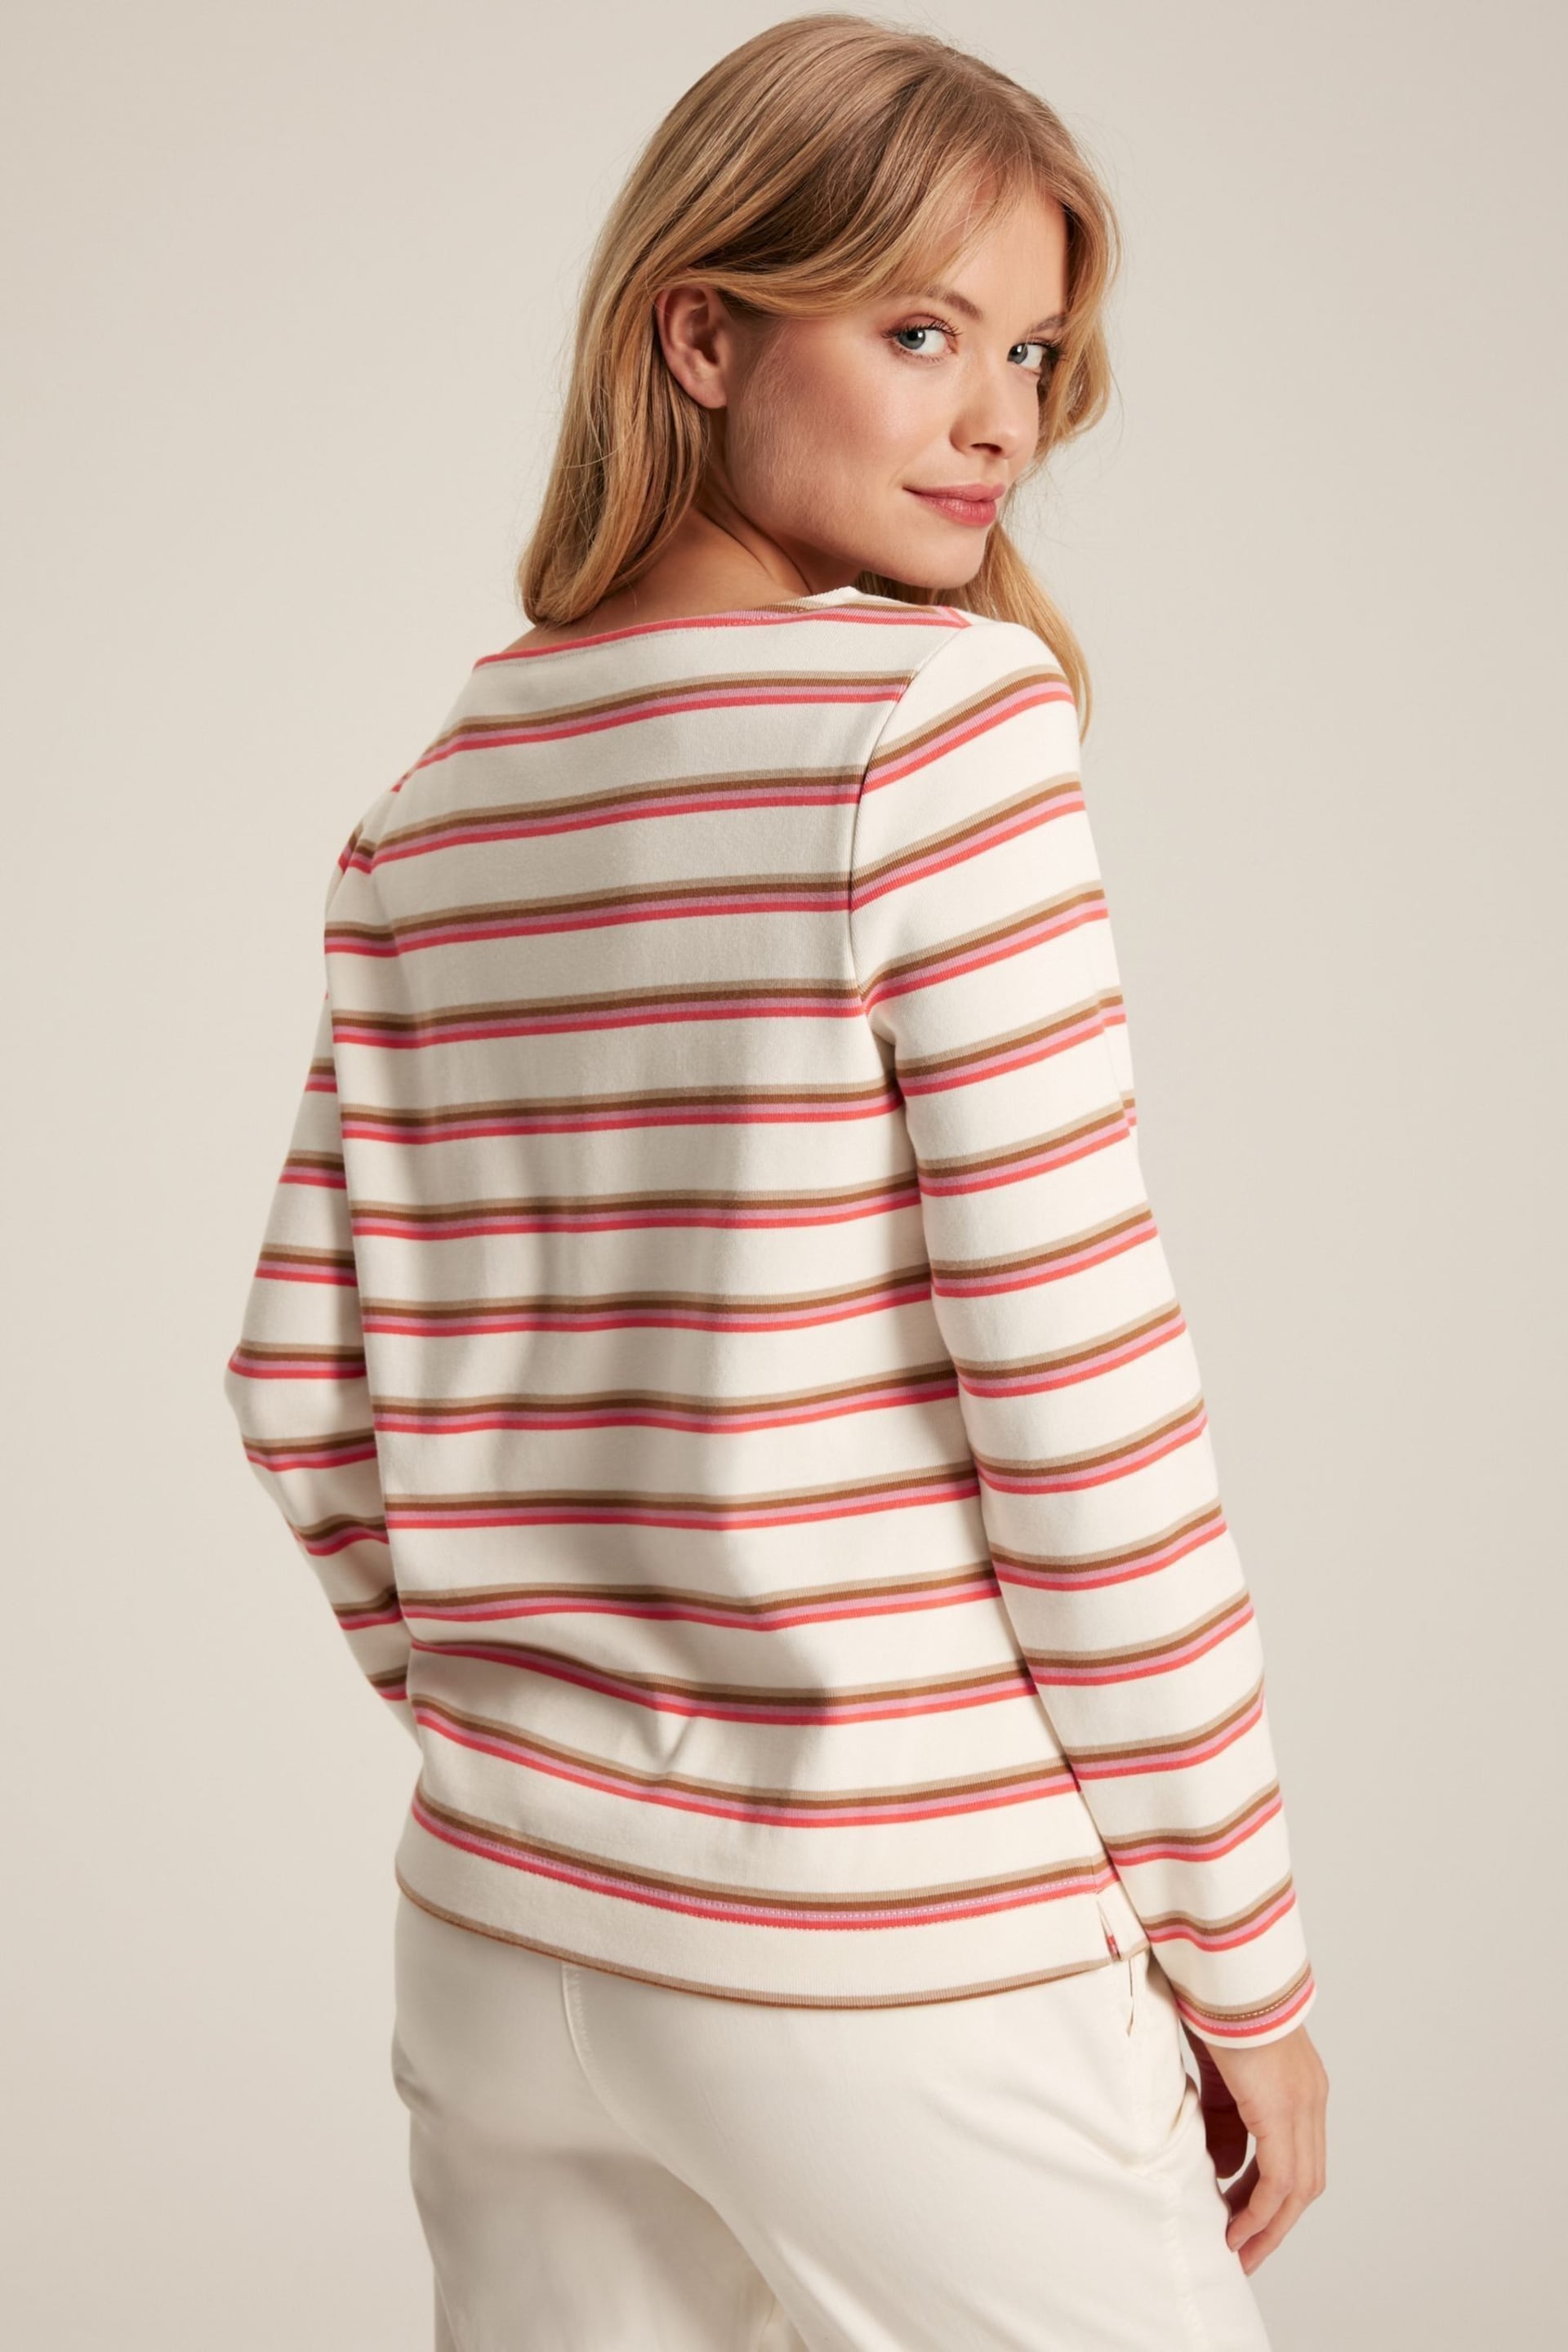 Joules New Harbour Pink & Tan Striped Boat Neck Breton Top - Image 2 of 6